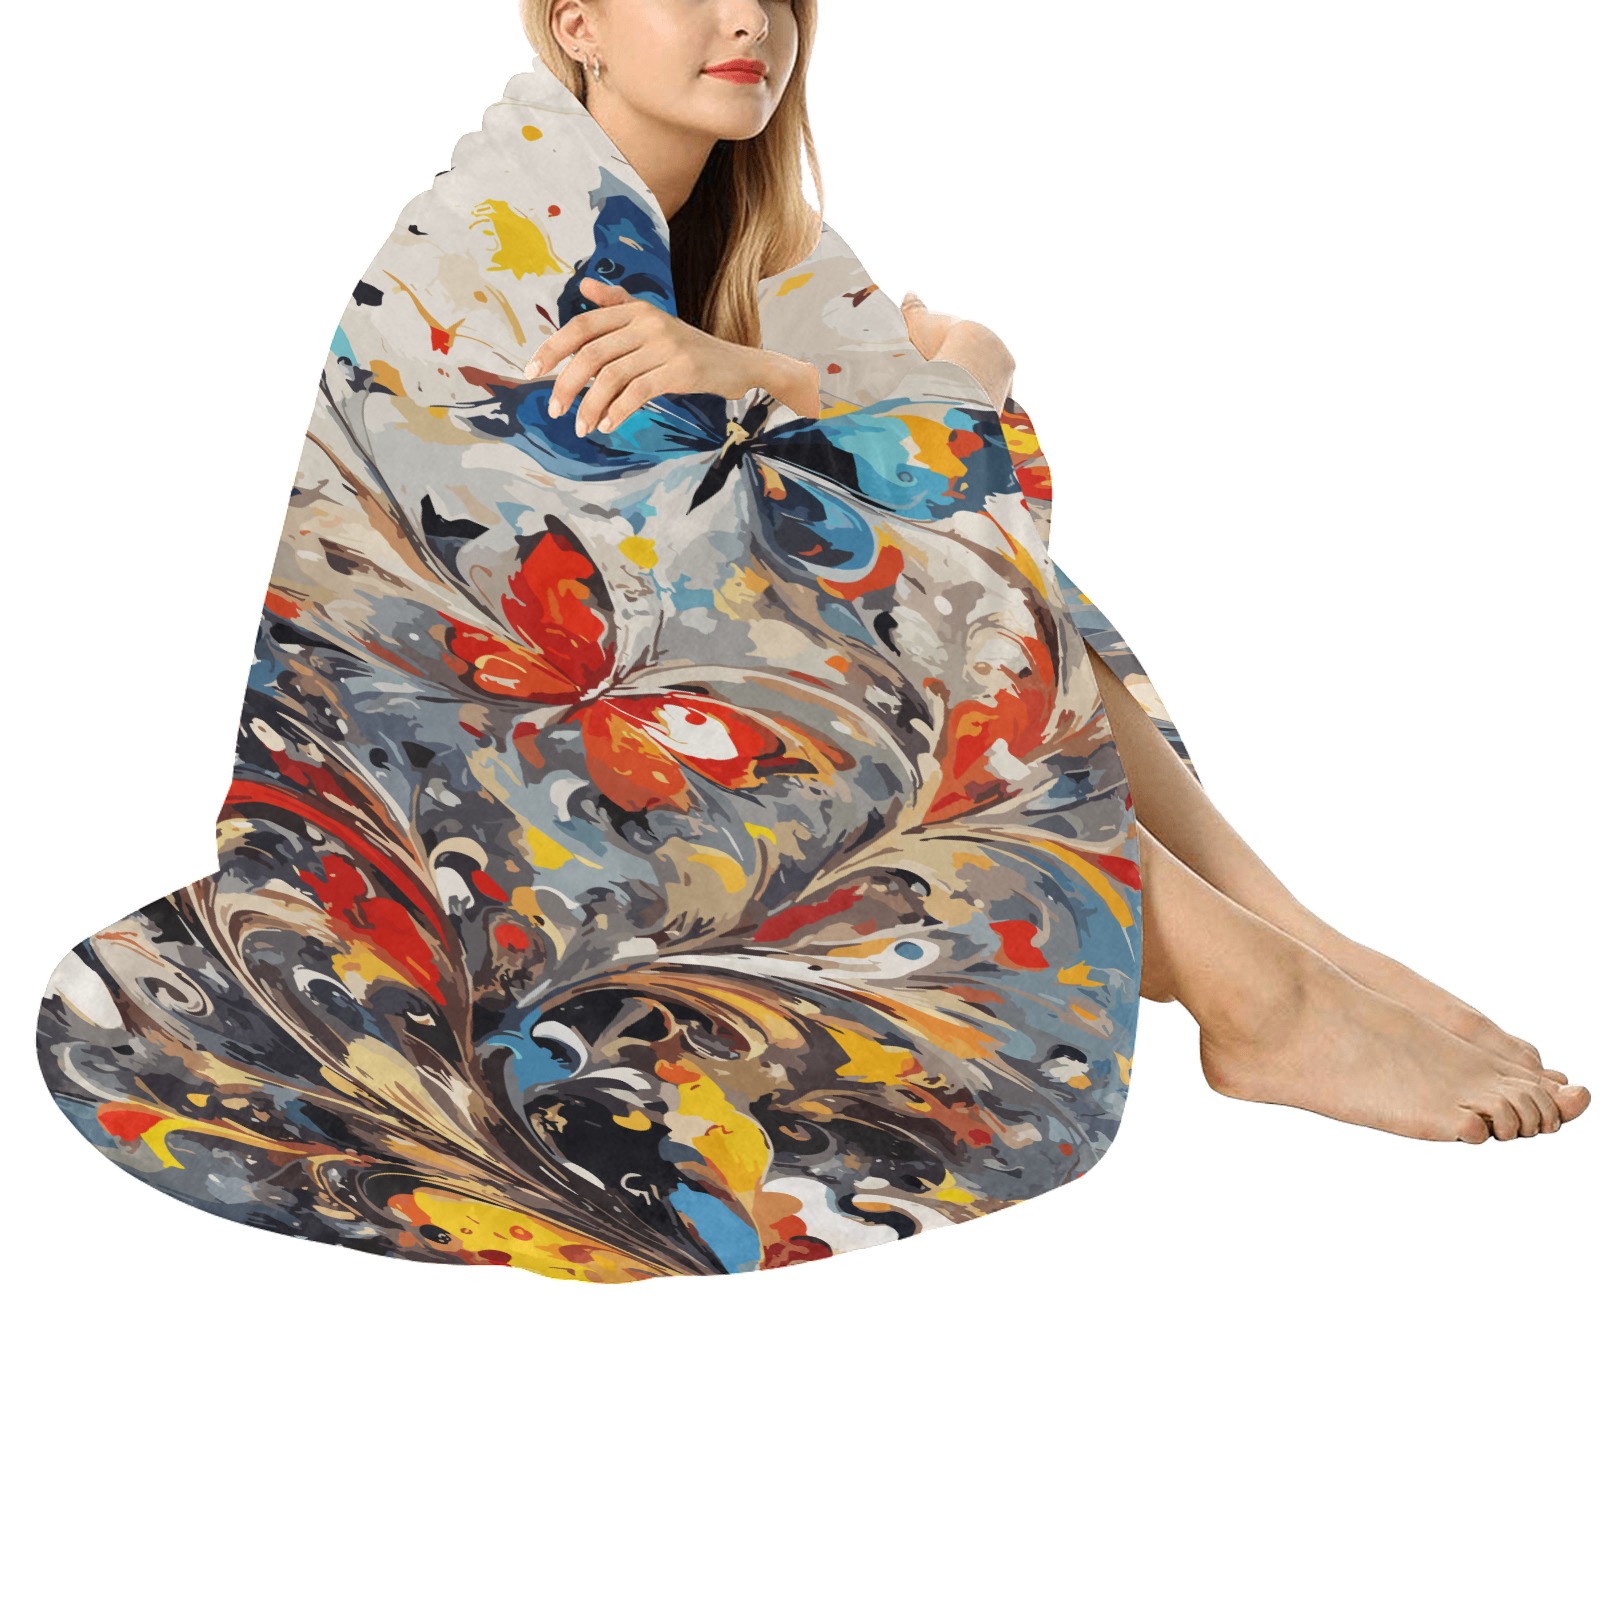 Decorative floral ornament and awesome butterflies Circular Ultra-Soft Micro Fleece Blanket 60"